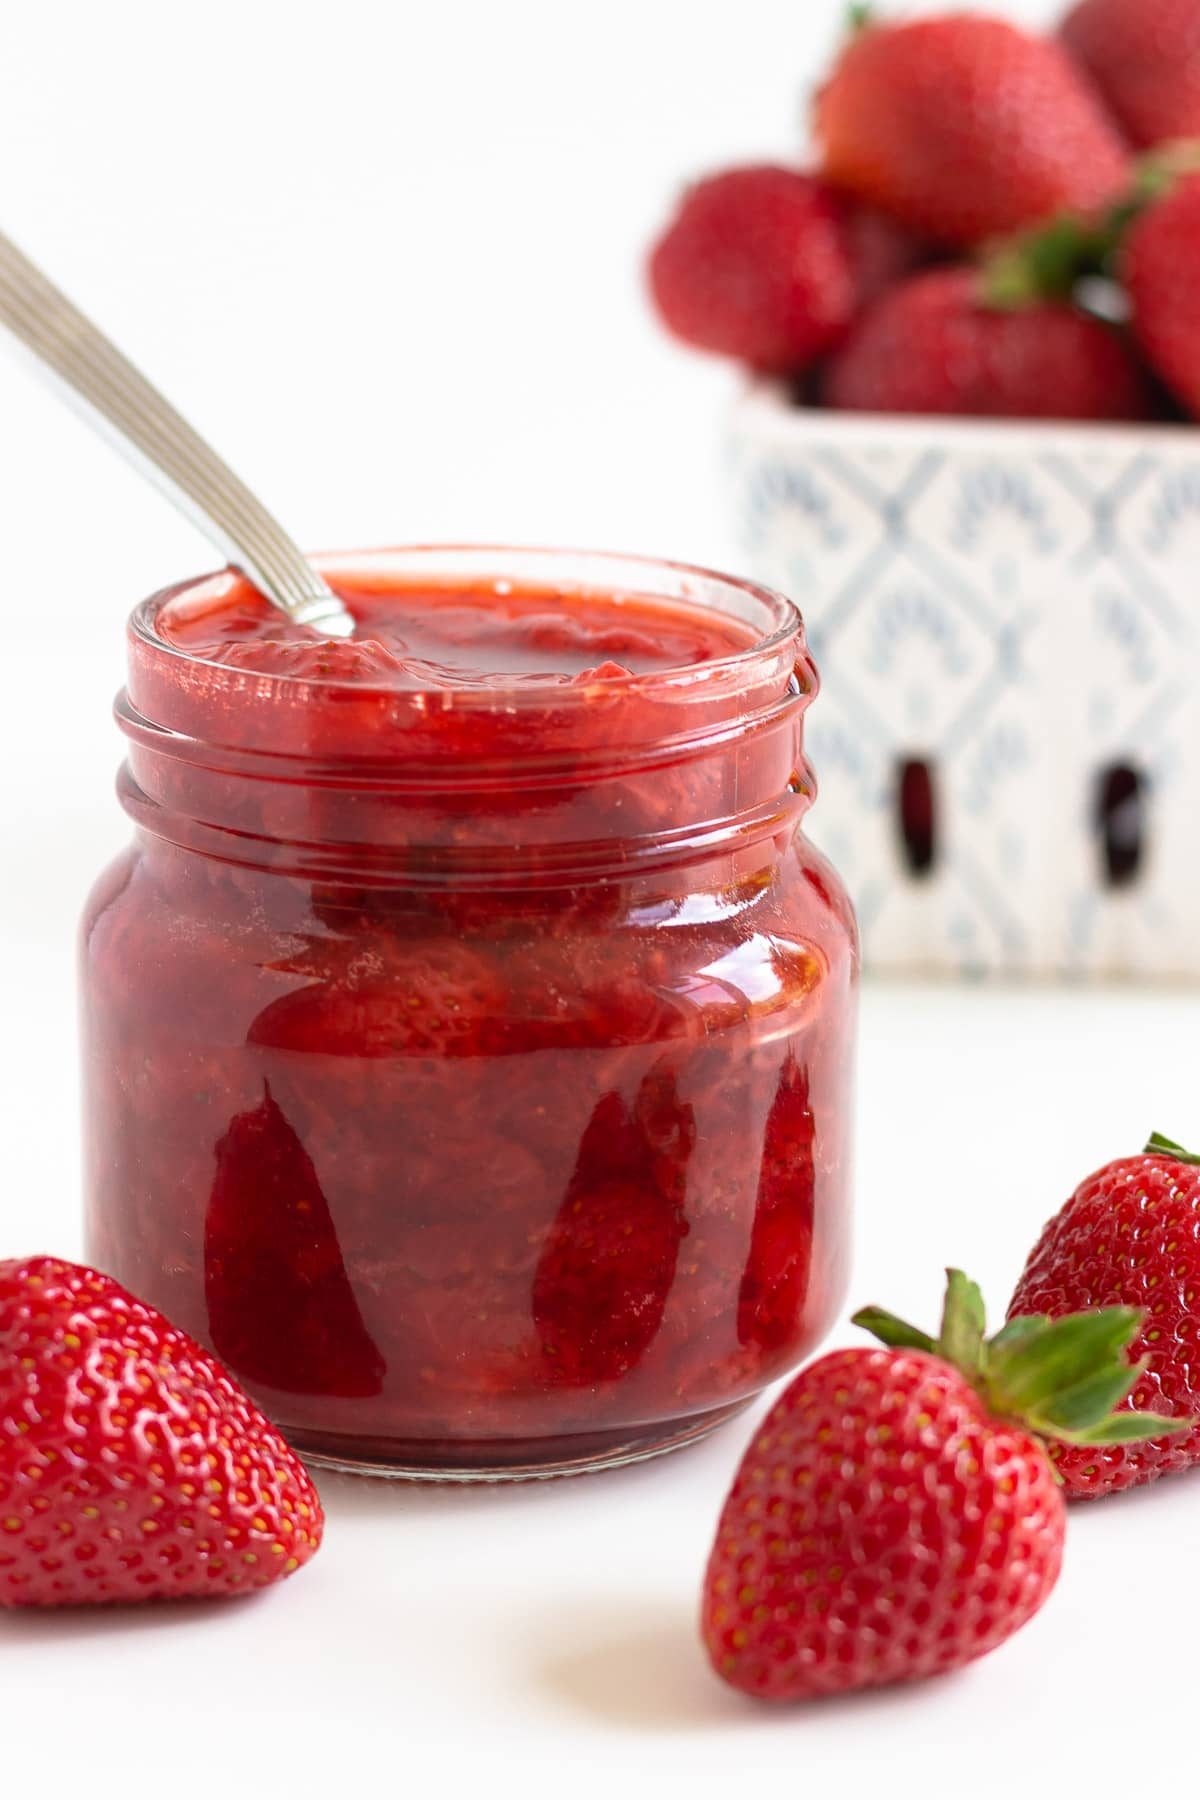 Jar of strawberry compote with fresh strawberries around it.